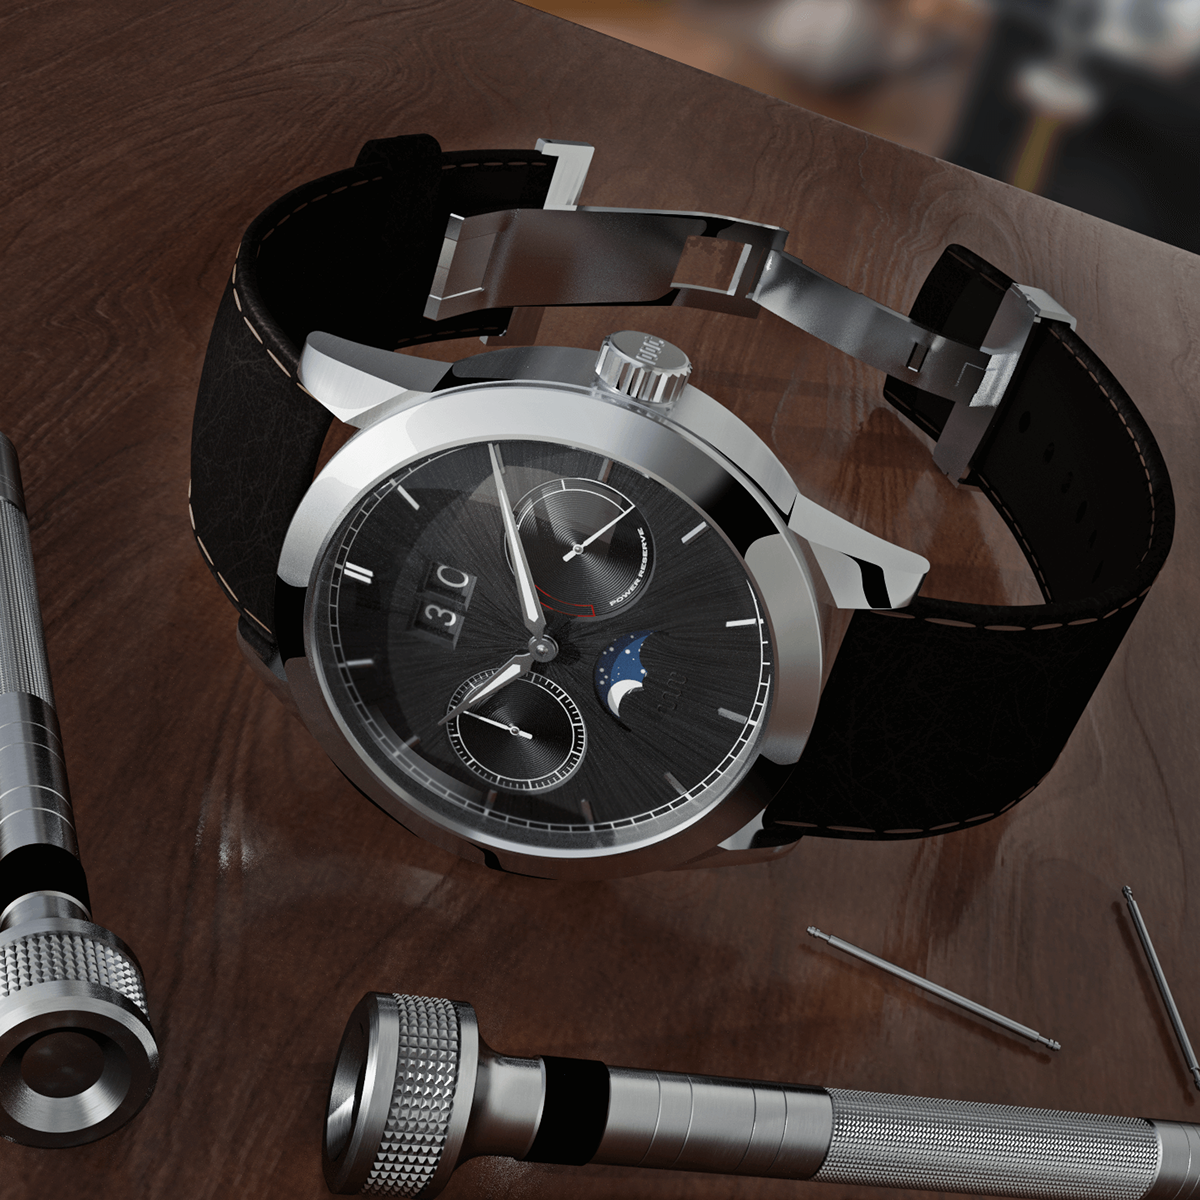 watch Watches Moon Phase date mechanical rendering 3d modeling watch design